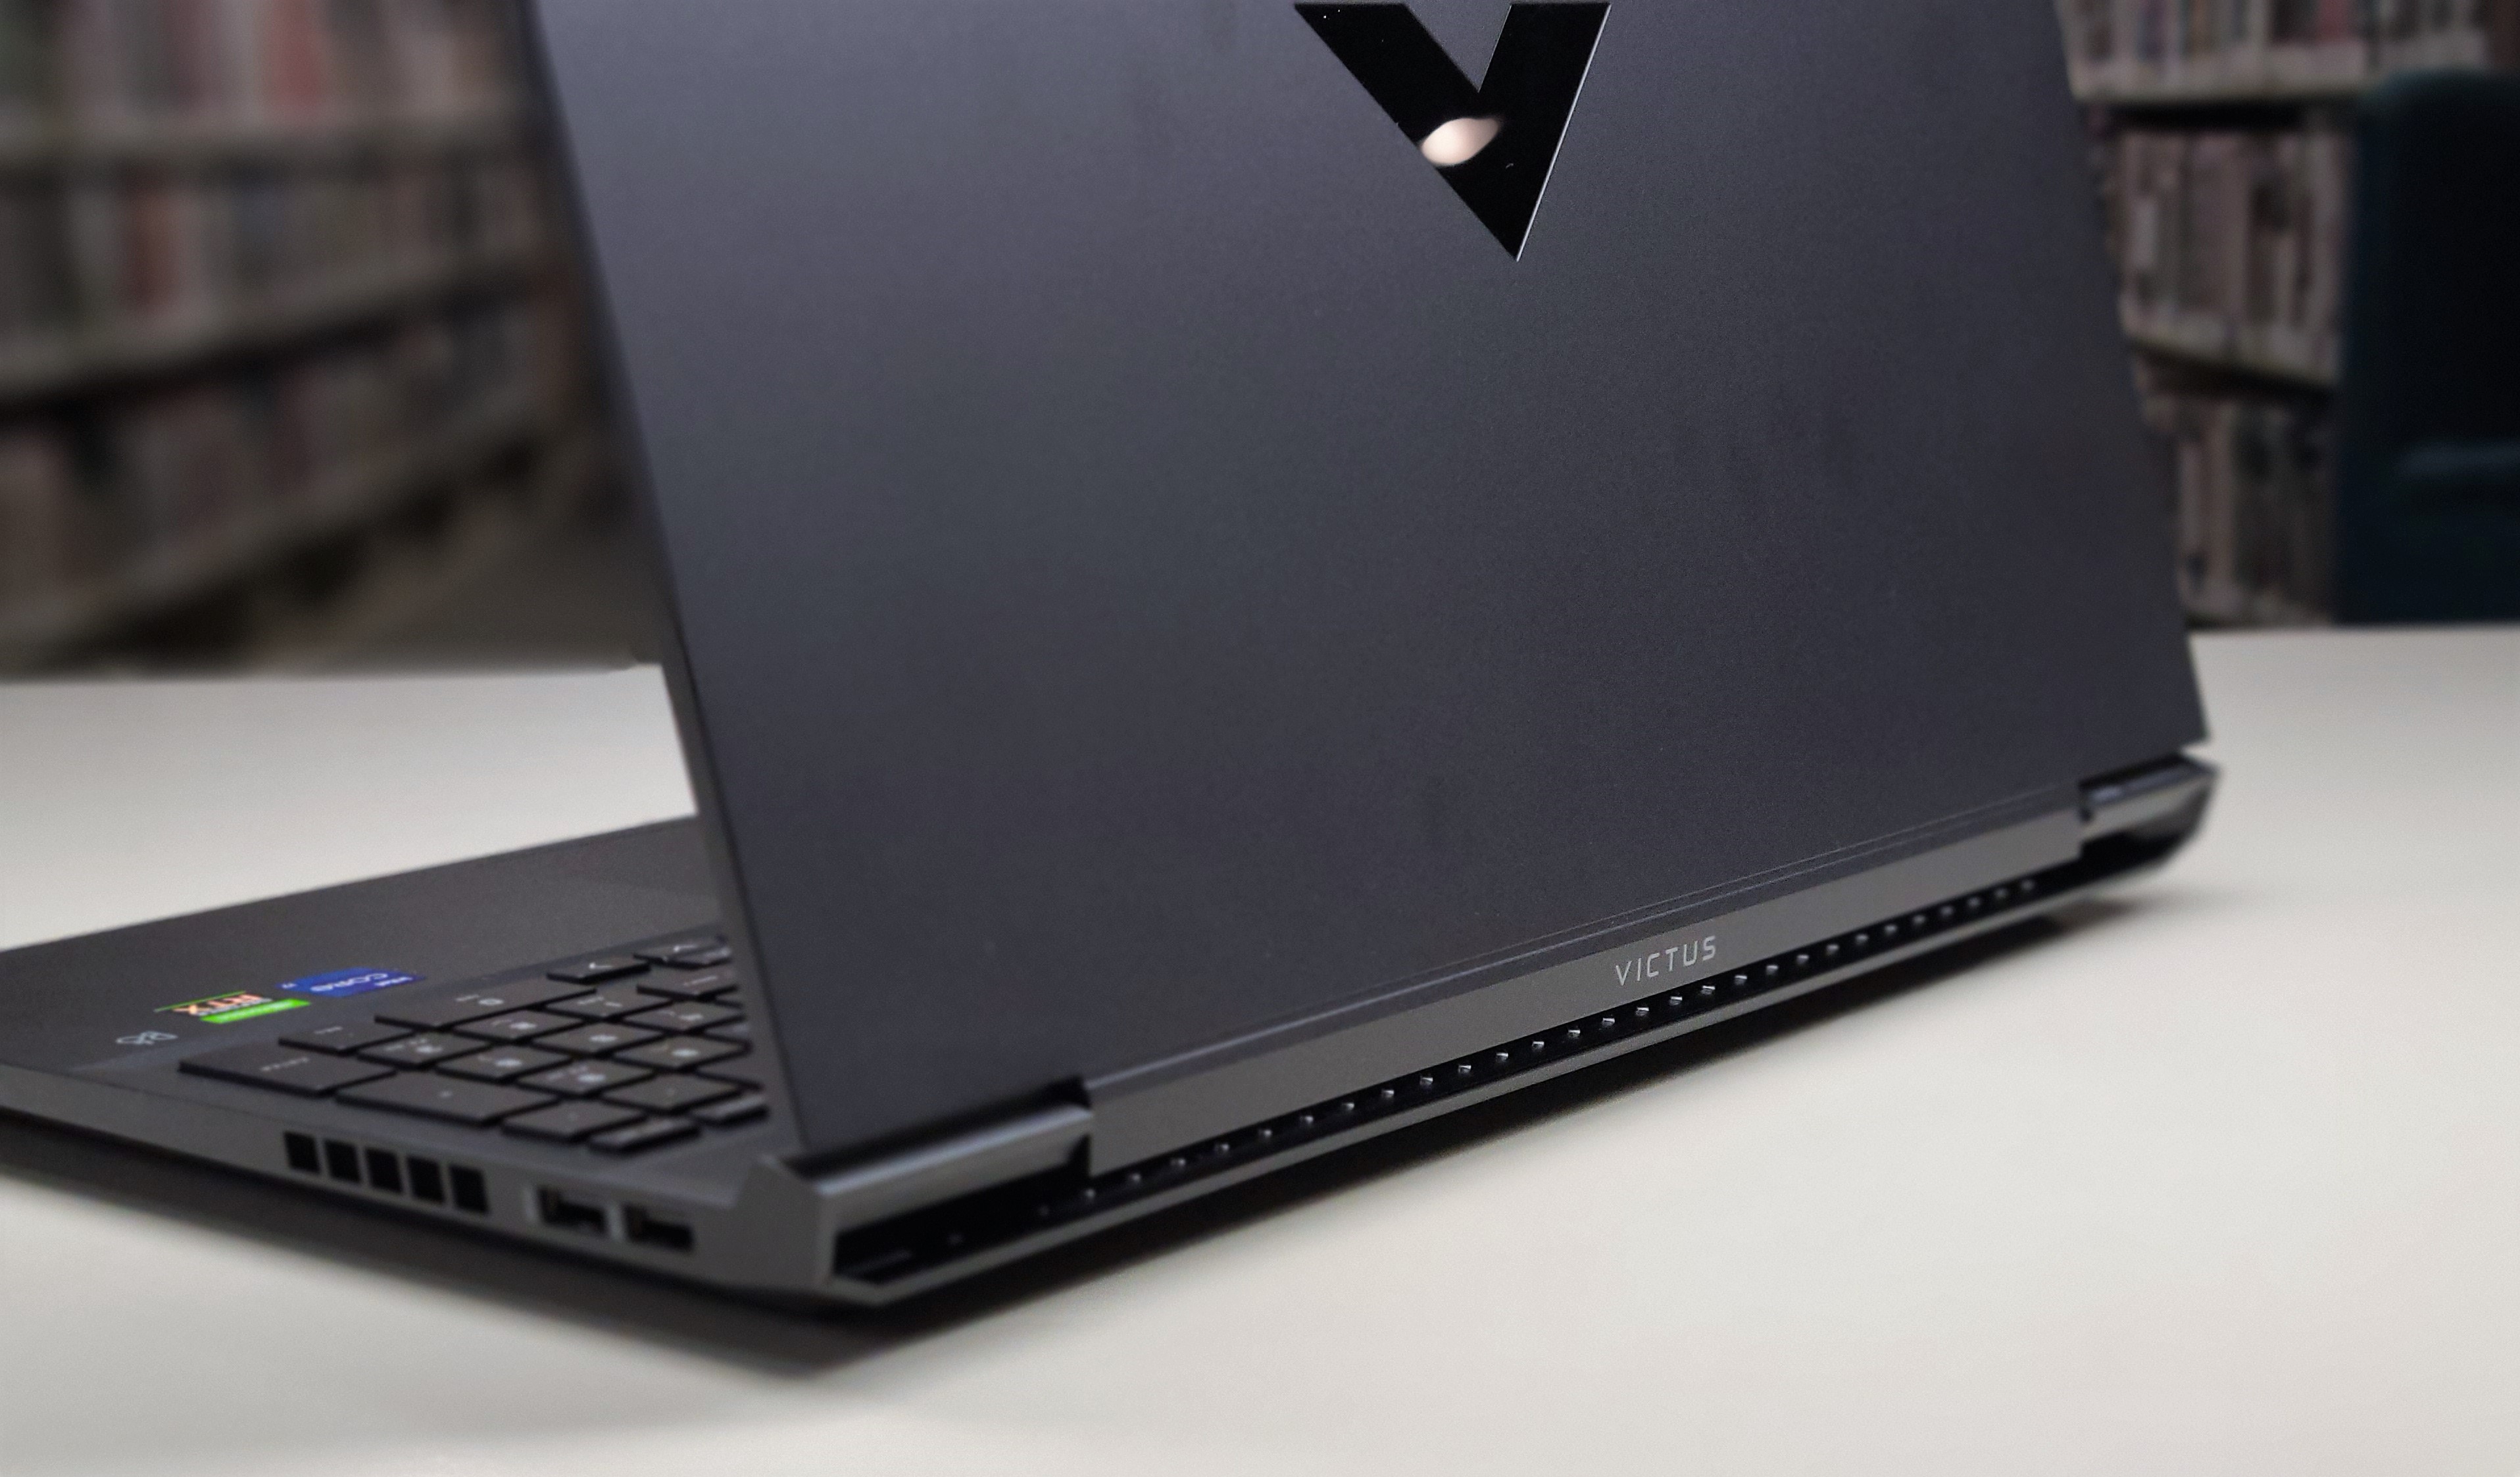 HP Victus 16 review: This 16-inch gaming laptop delivers solid